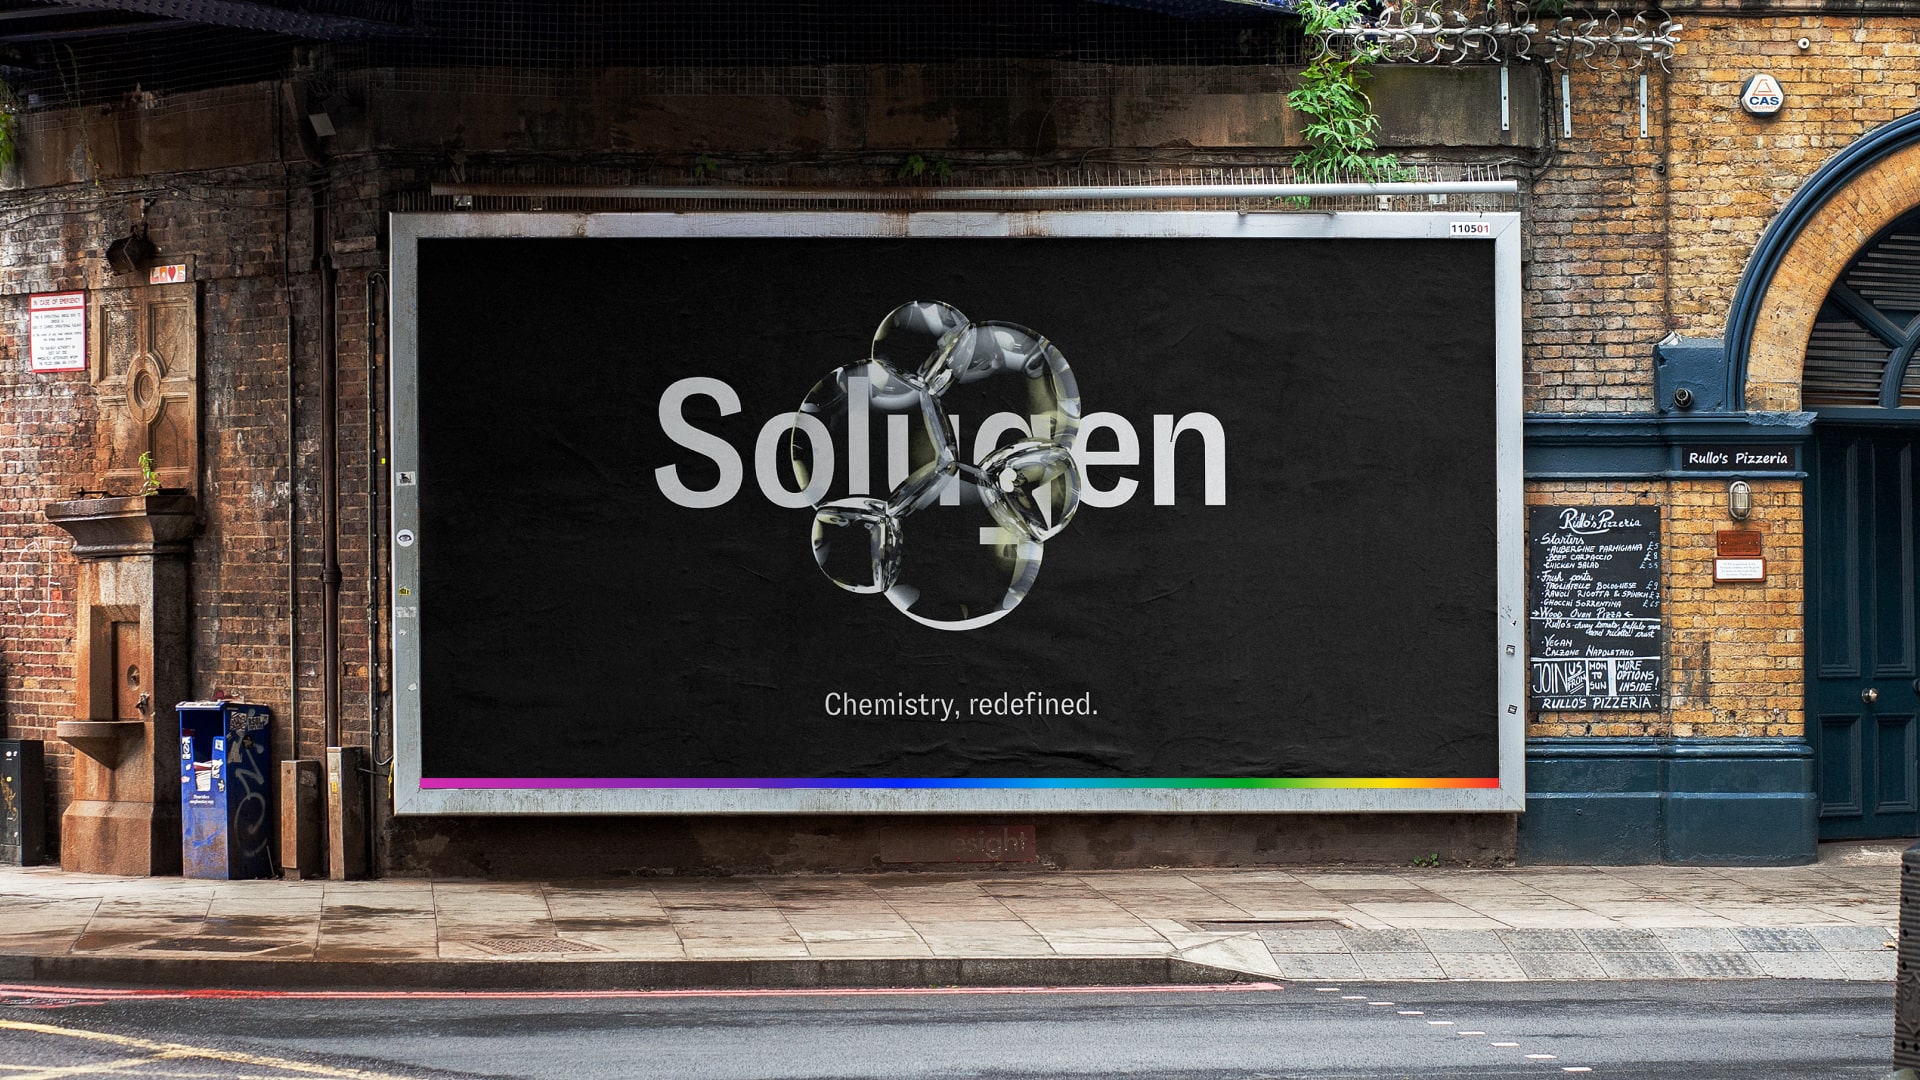 A billboard in a city environment with Solugen's logo